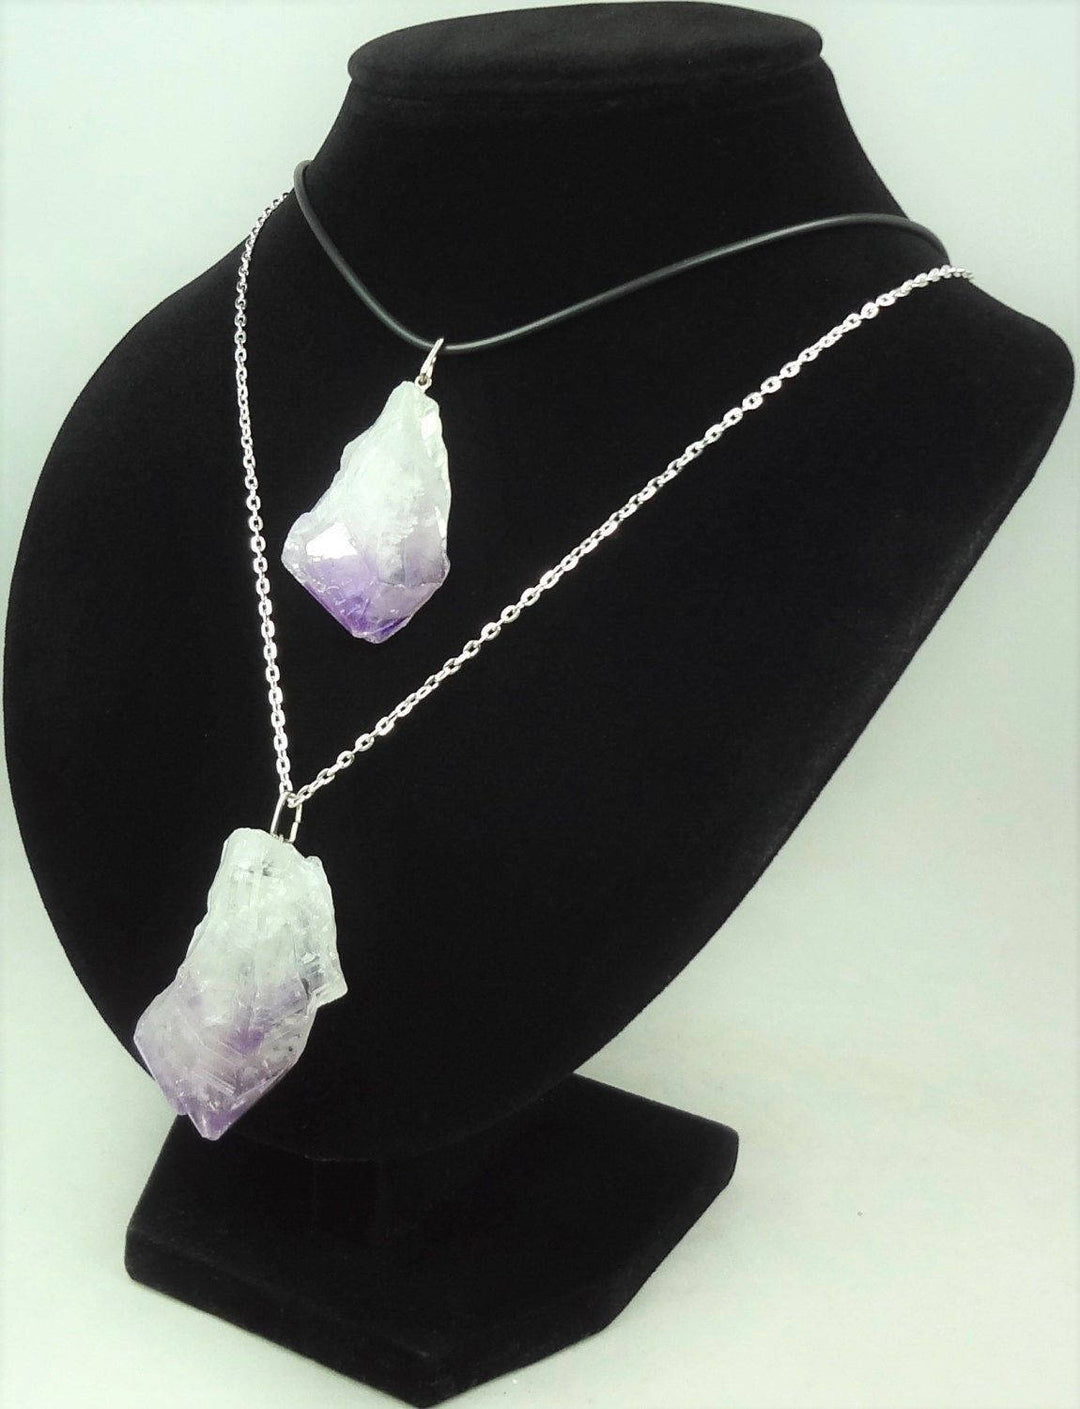 Amethyst Necklace Large Raw Crystal Point Pendant Purple Gemstone Charm Natural Silver Healing Crystals Stones Jewelry